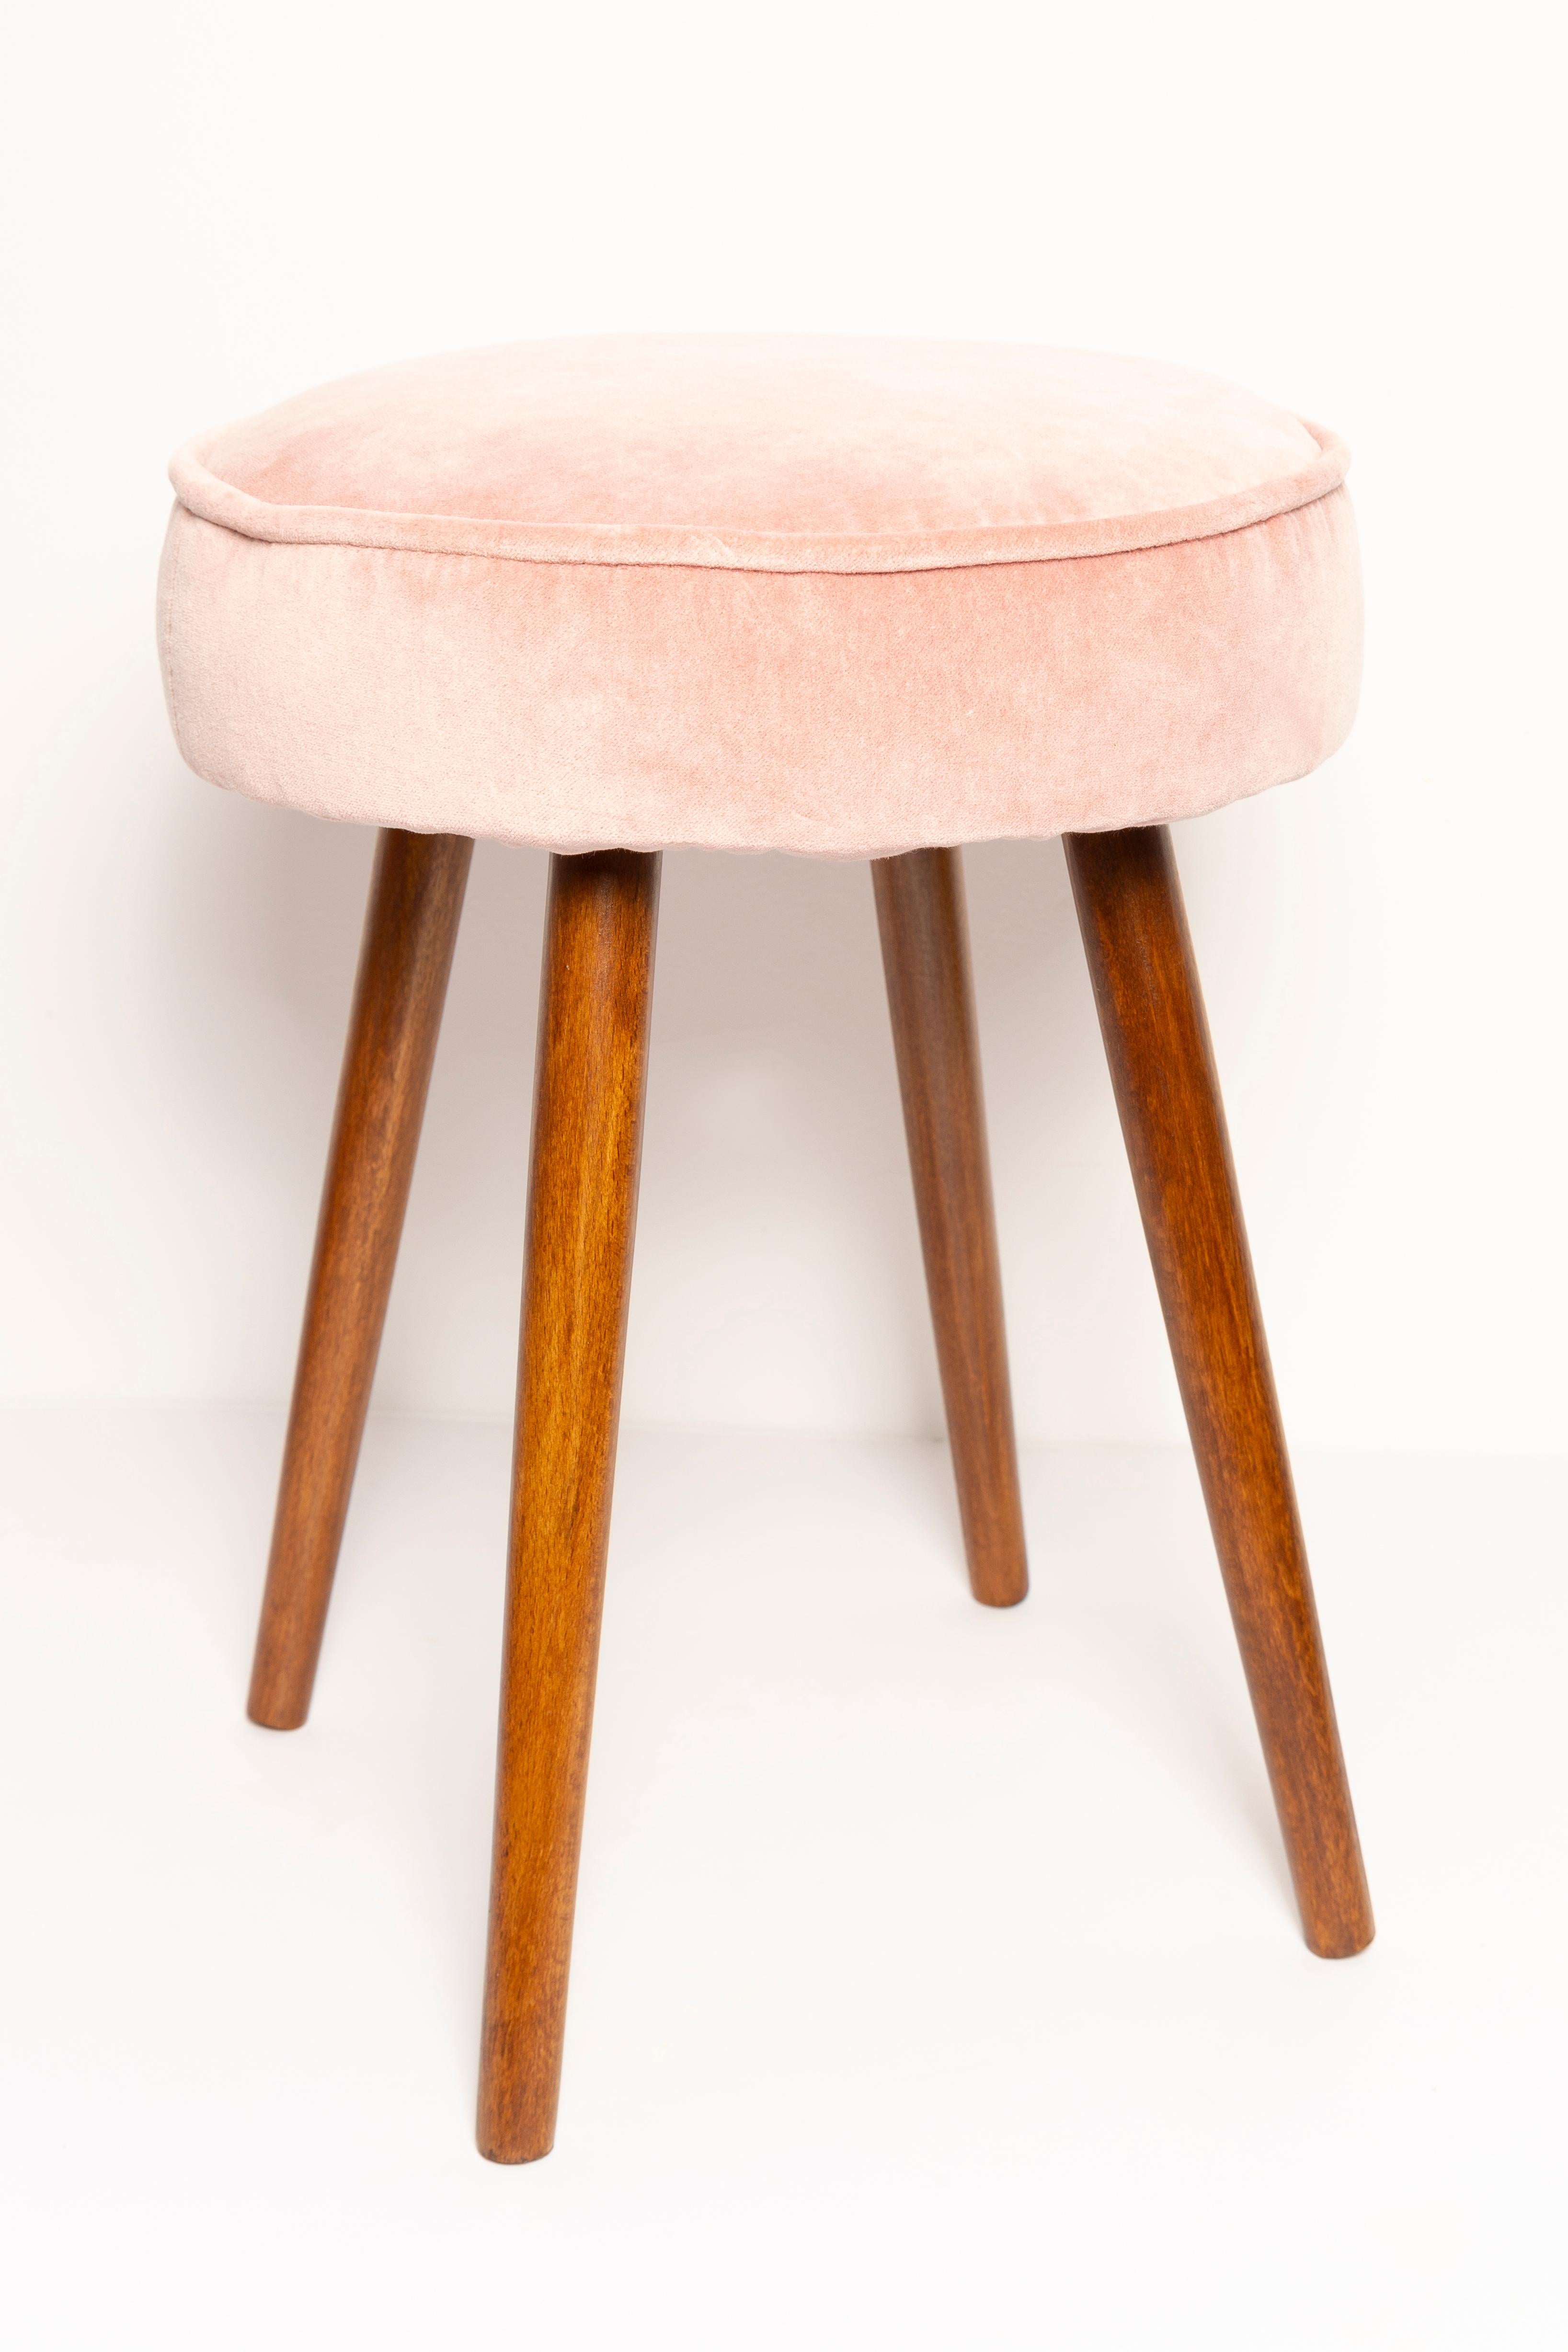 Stool from the turn of the 1960s and 1970s. Beautiful baby pink upholstery. The stool consists of an upholstered part, a seat and wooden legs narrowing downwards, characteristic of the 1960s style. We can prepare this pair also in another color of